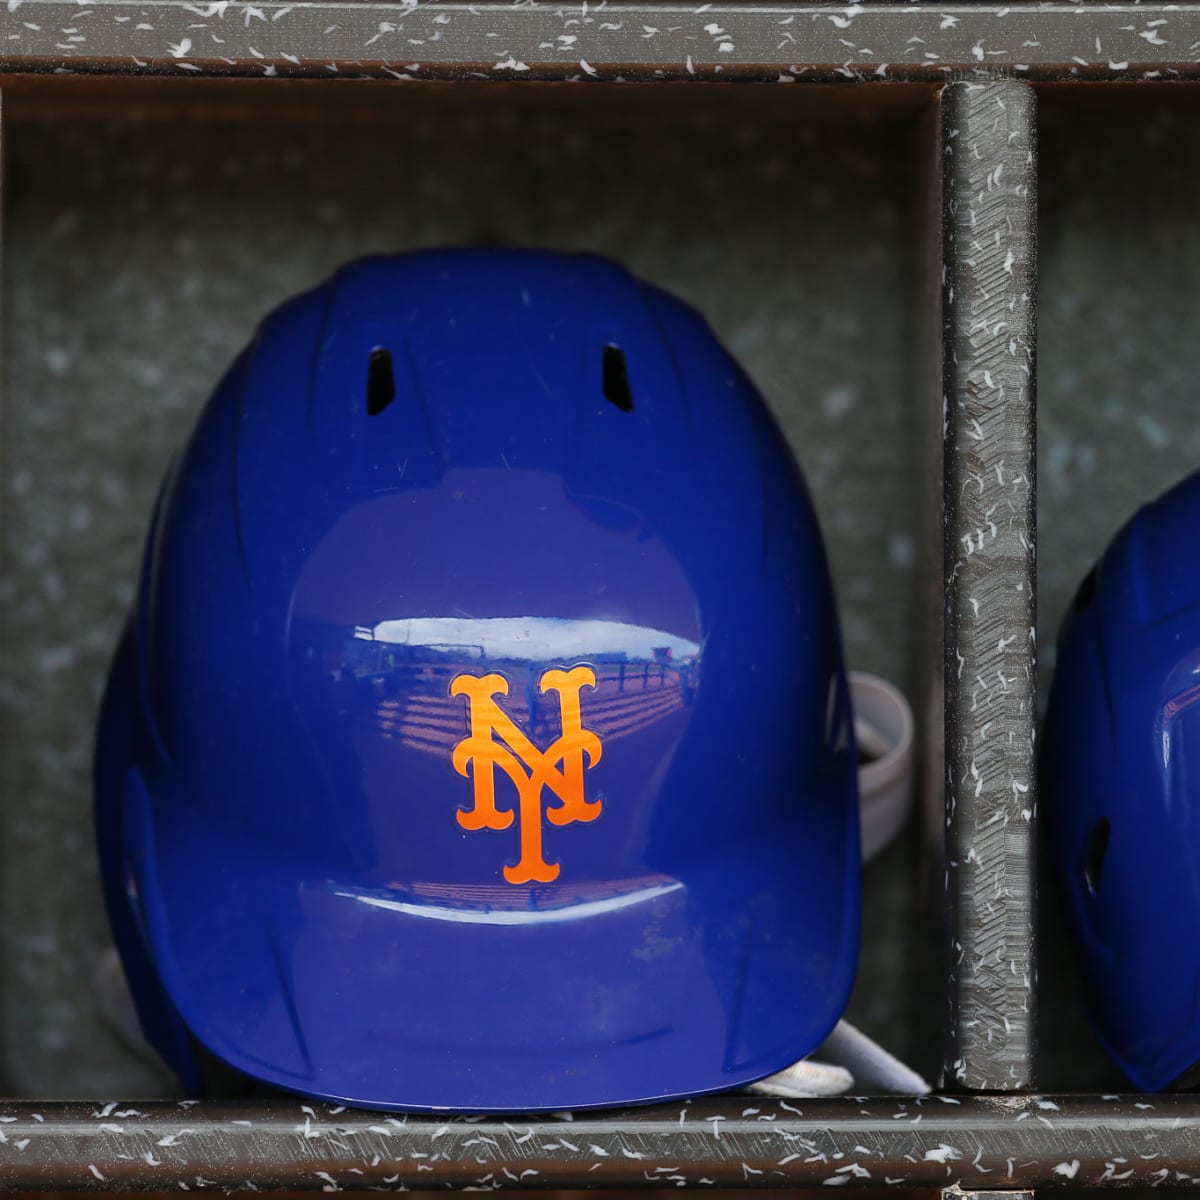 Sports World Reacts To Mets' Awful Uniform Announcement - The Spun